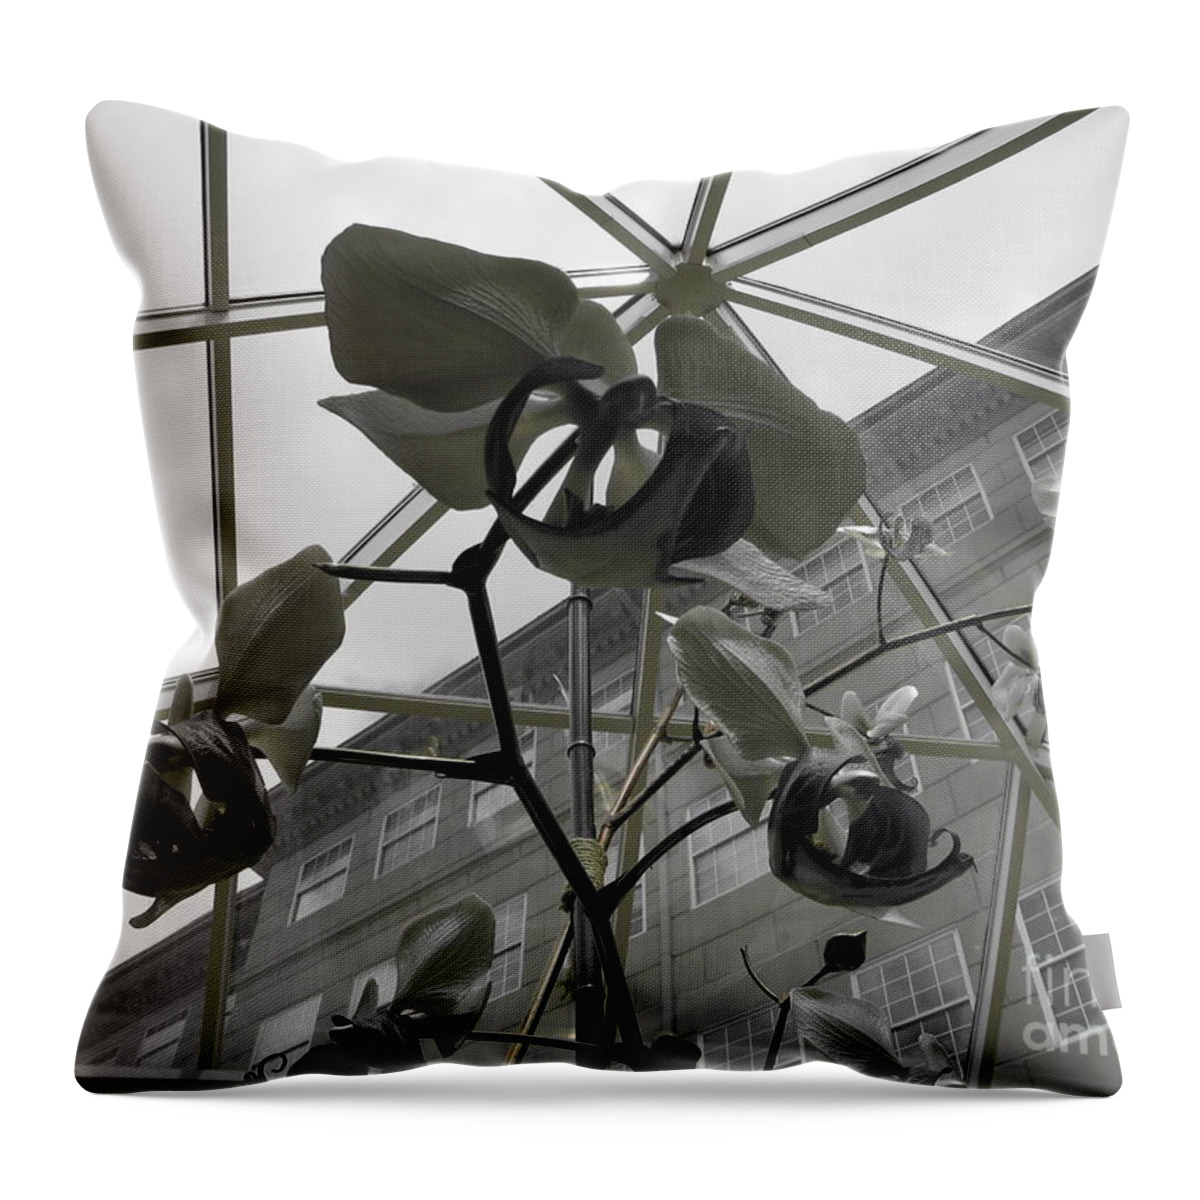 Orchid Throw Pillow featuring the photograph Thorns by Michael Krek